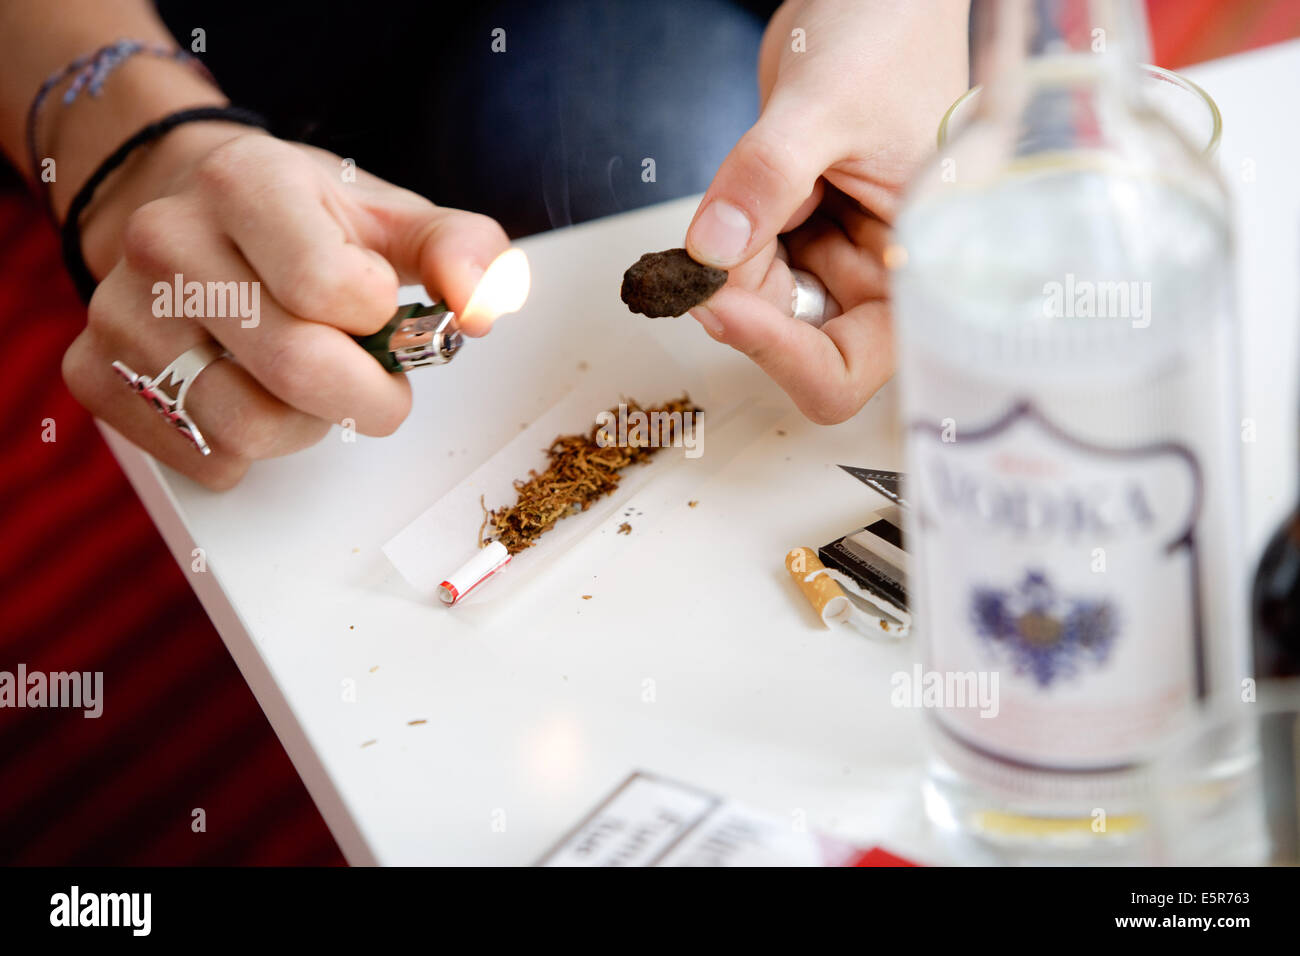 Young person burning hashish to roll a joint. Stock Photo